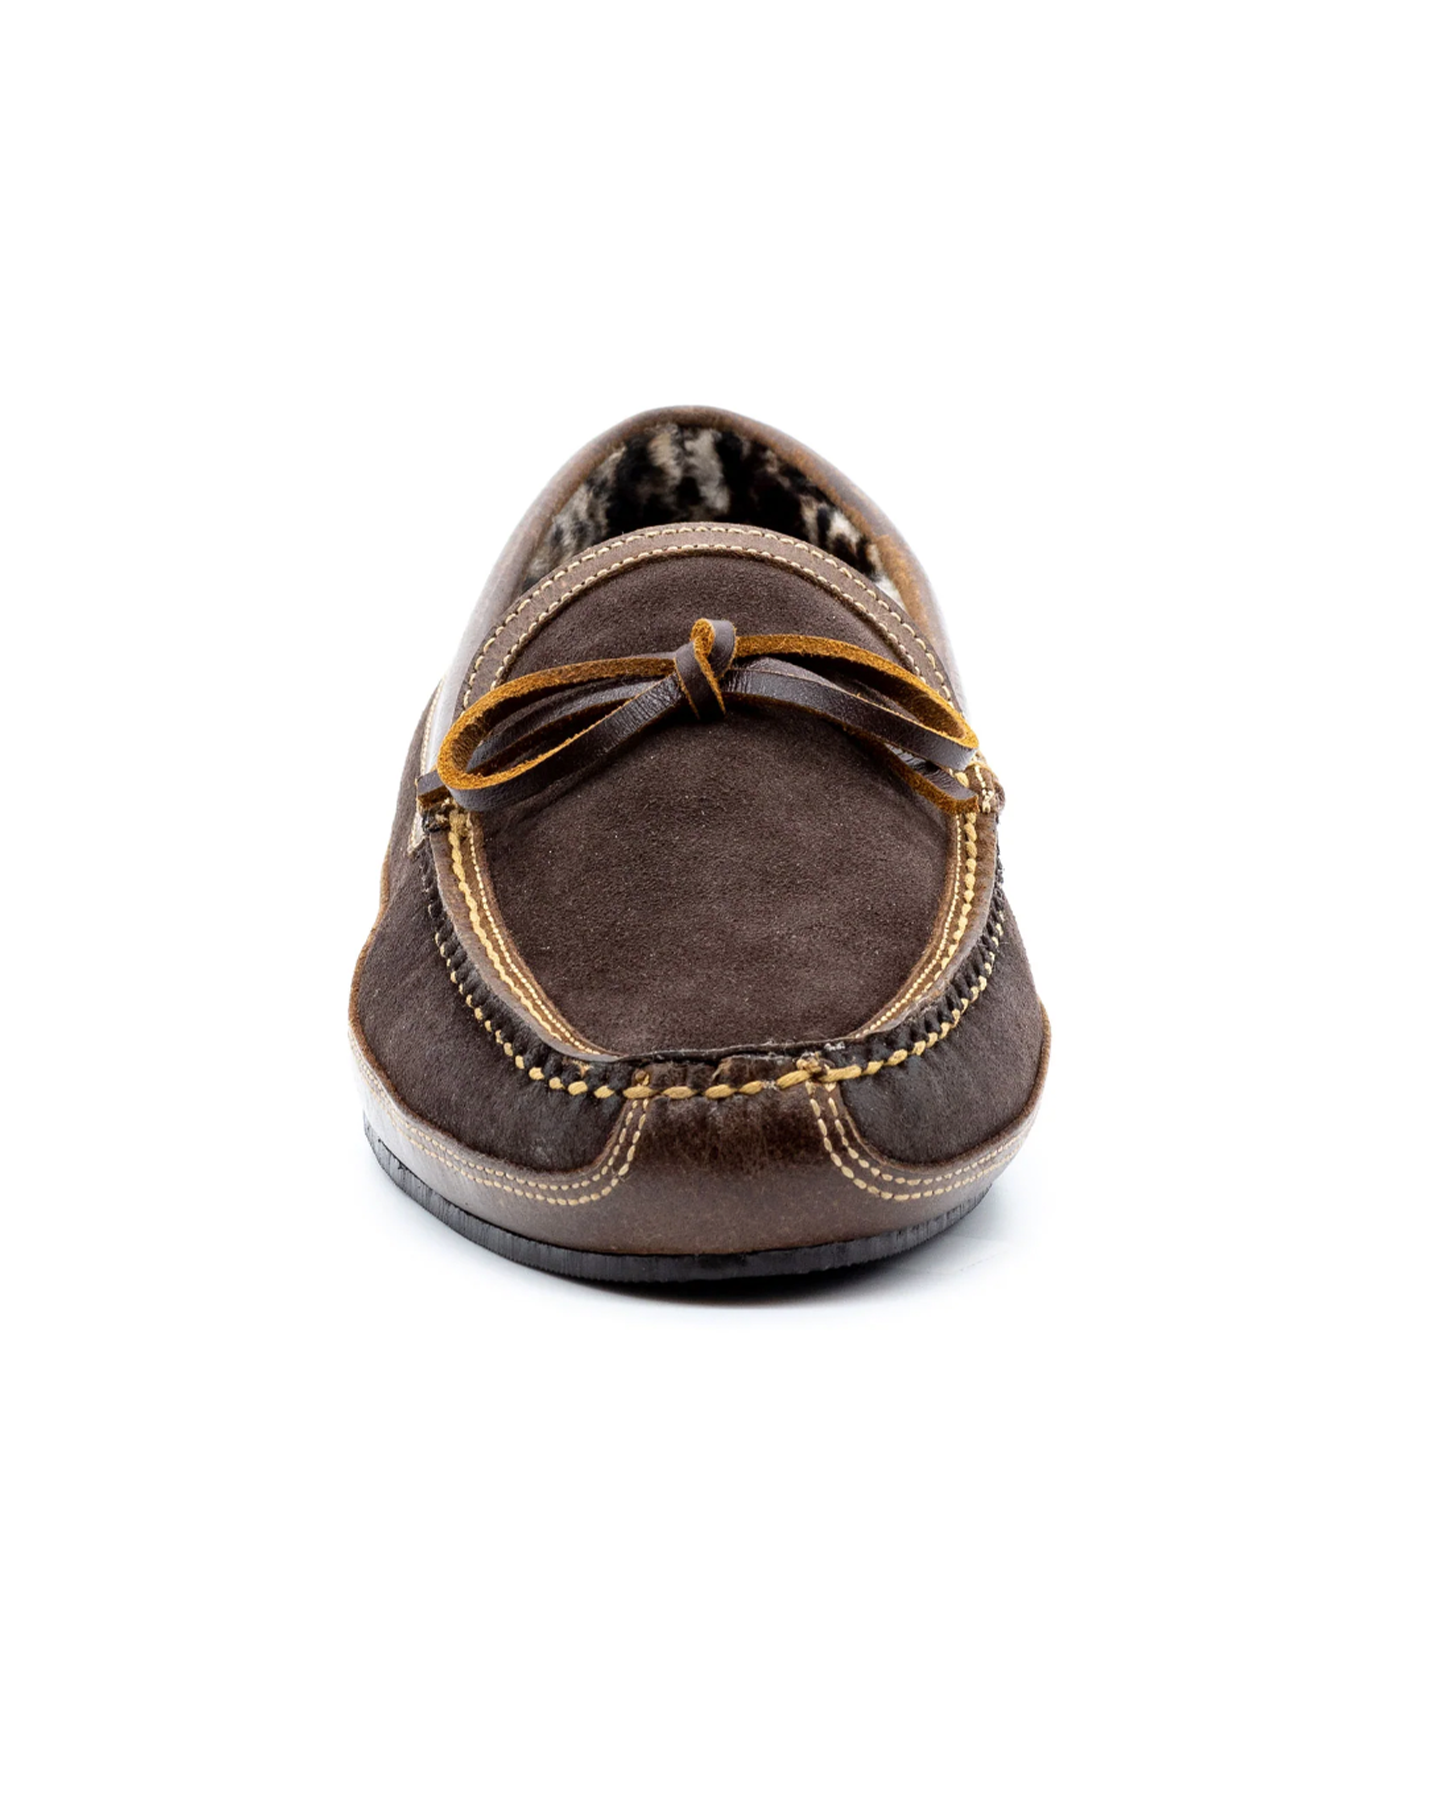 COZY COUNTRY BOW TIE SUEDE AND LEATHER SLIPPER - WALNUT